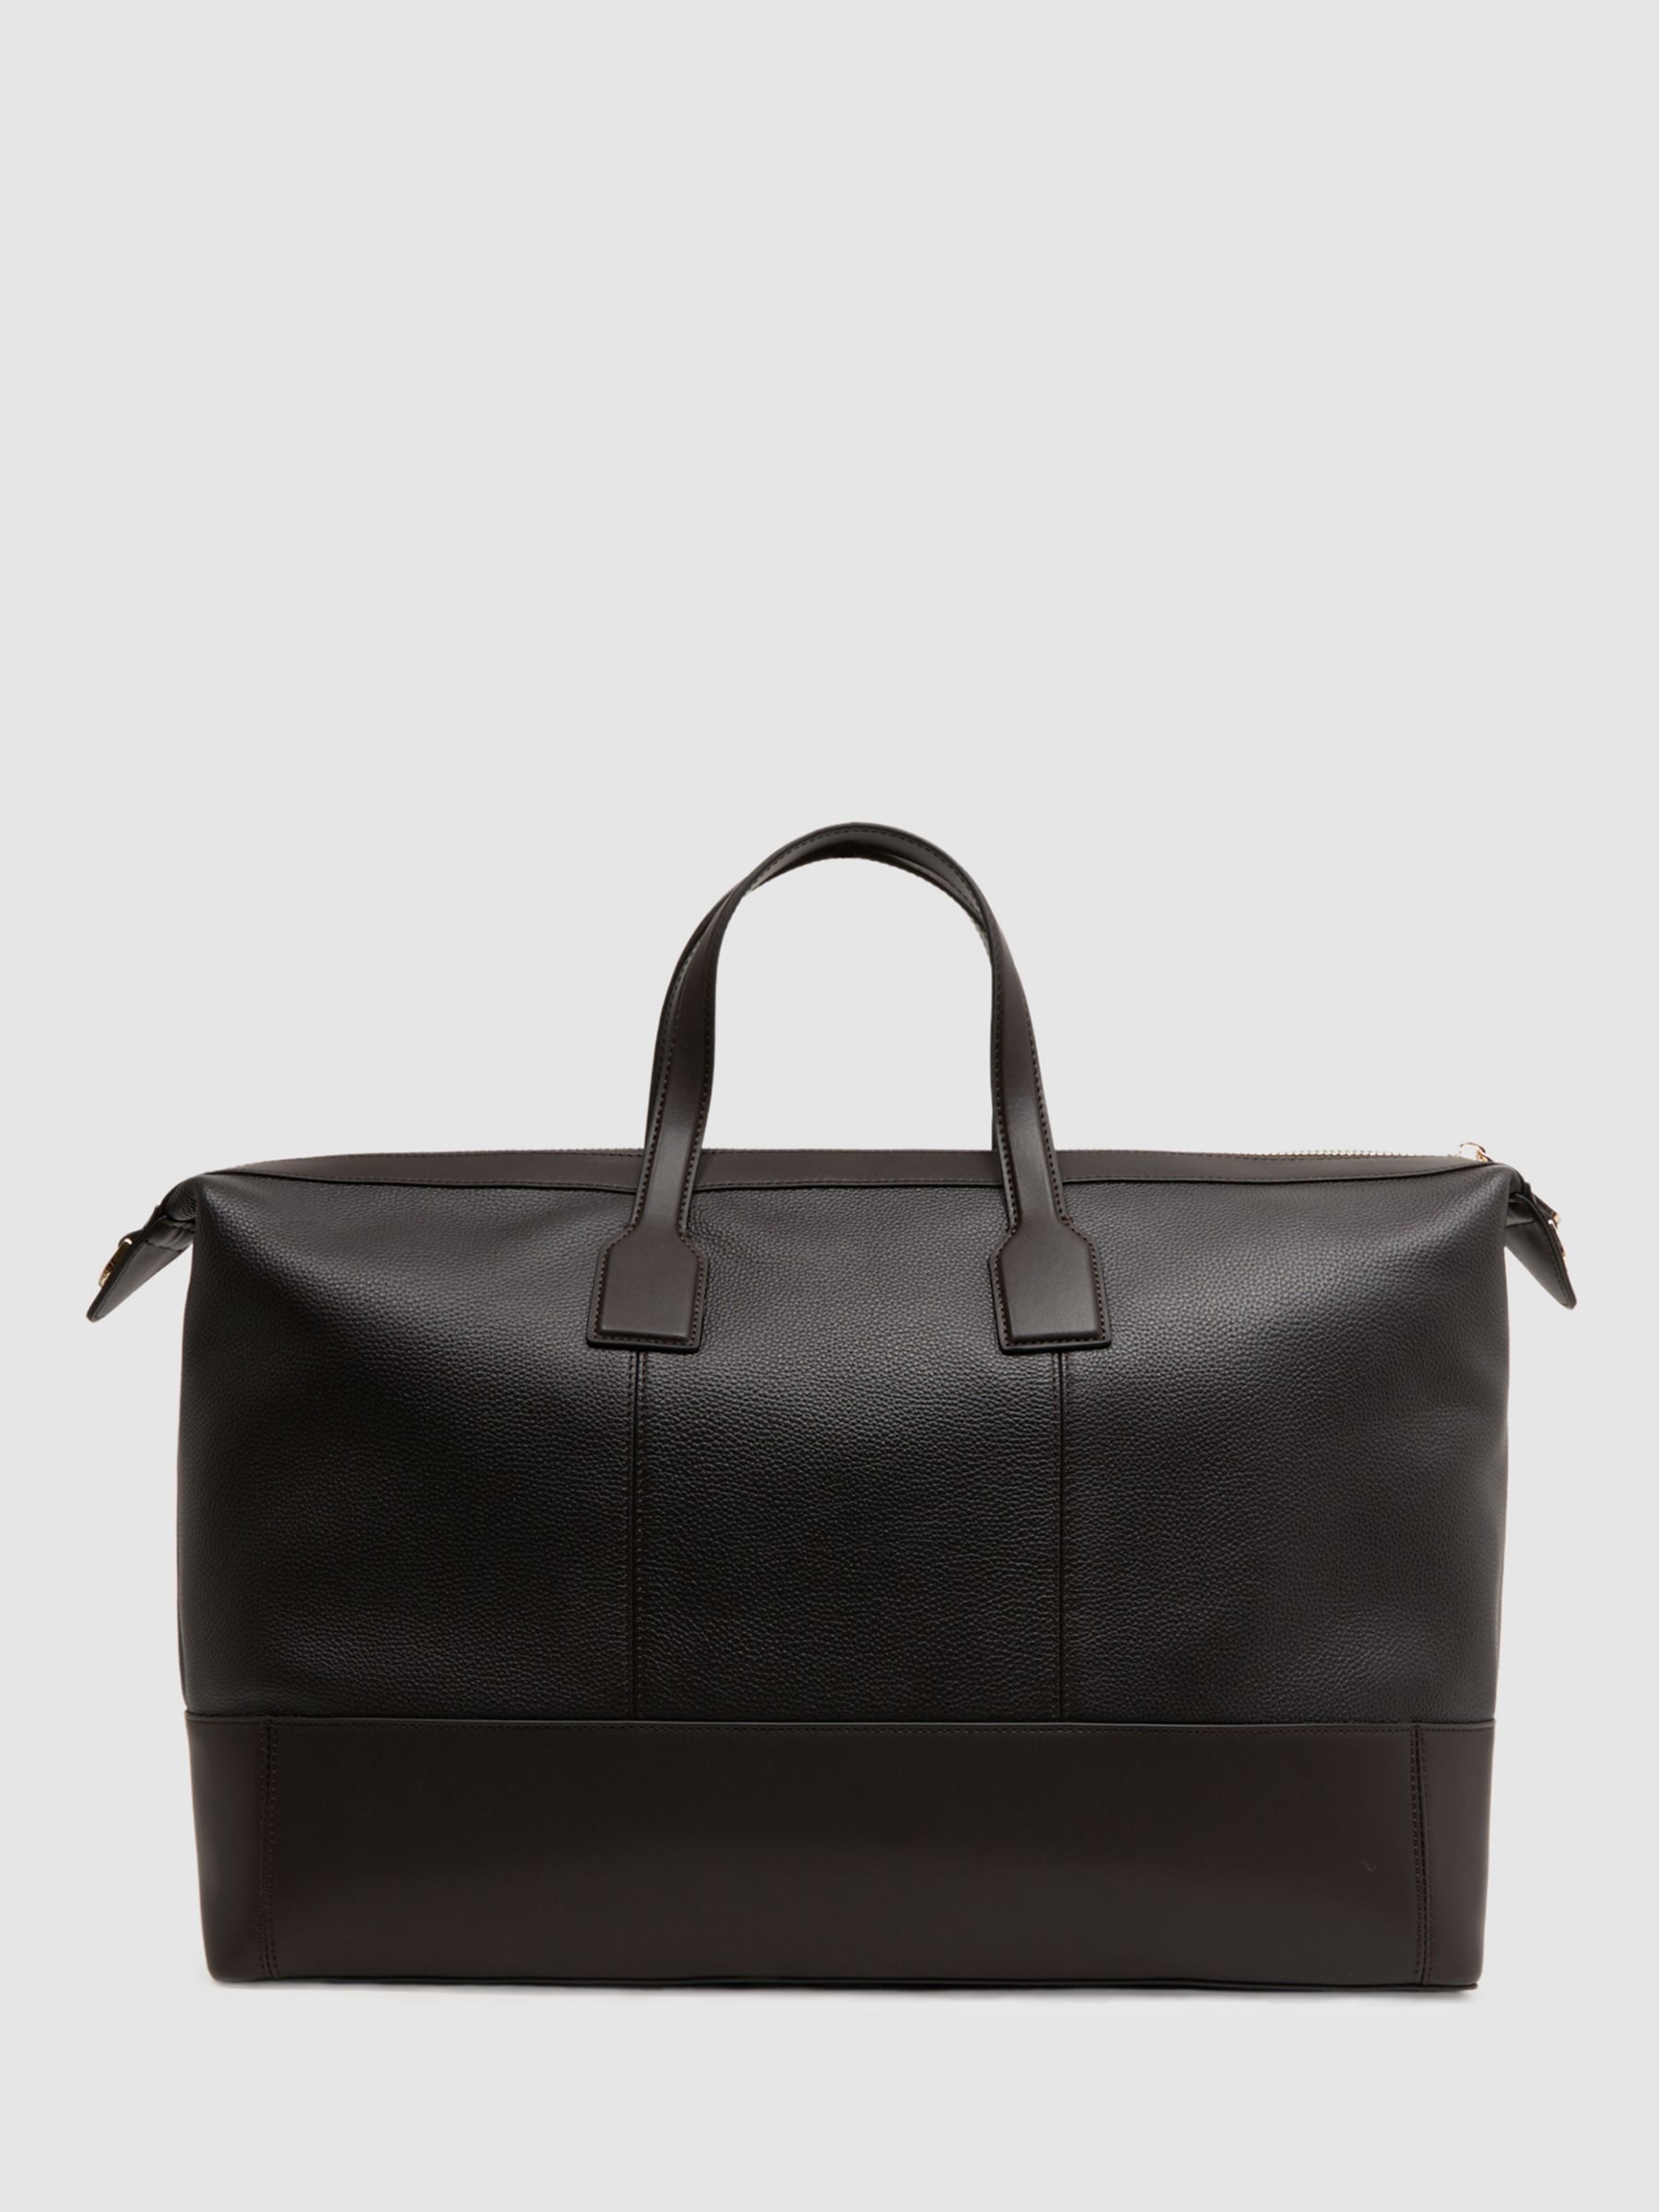 Reiss Carter Leather Hodall Bag, Chocolate, One Size